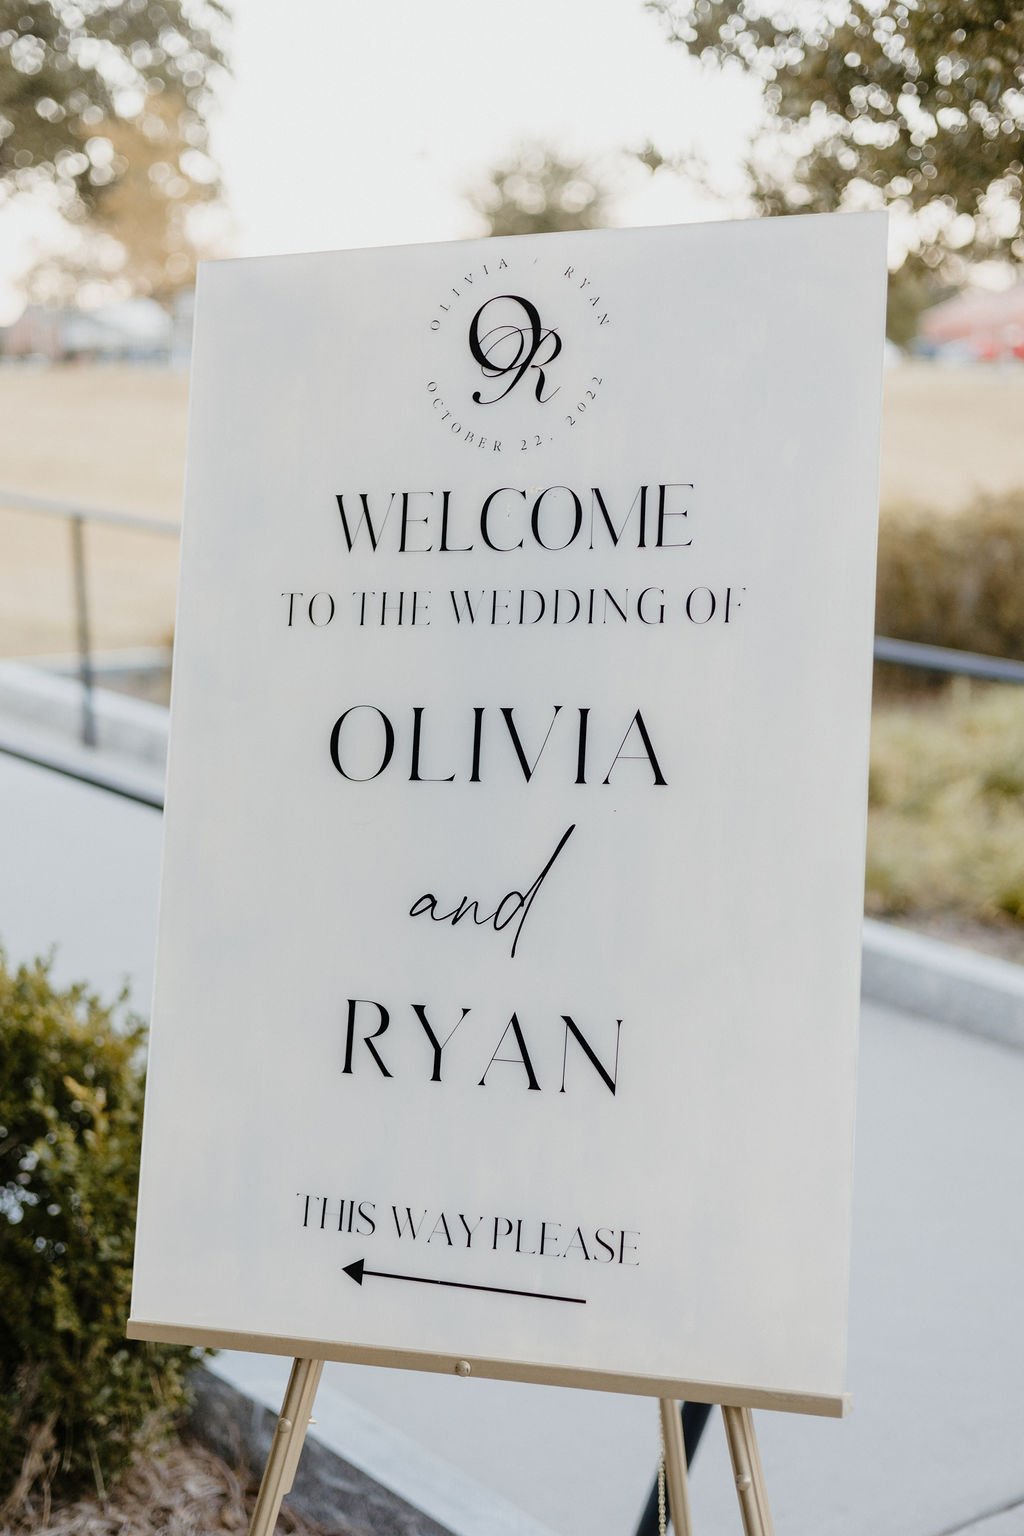 olivia-and-ryans-modern-industrial-chic-savannah-wedding-at-kehoe-iron-works-planned-by-savannah-wedding-planner-and-florist-ivory-and-beau-26.jpg